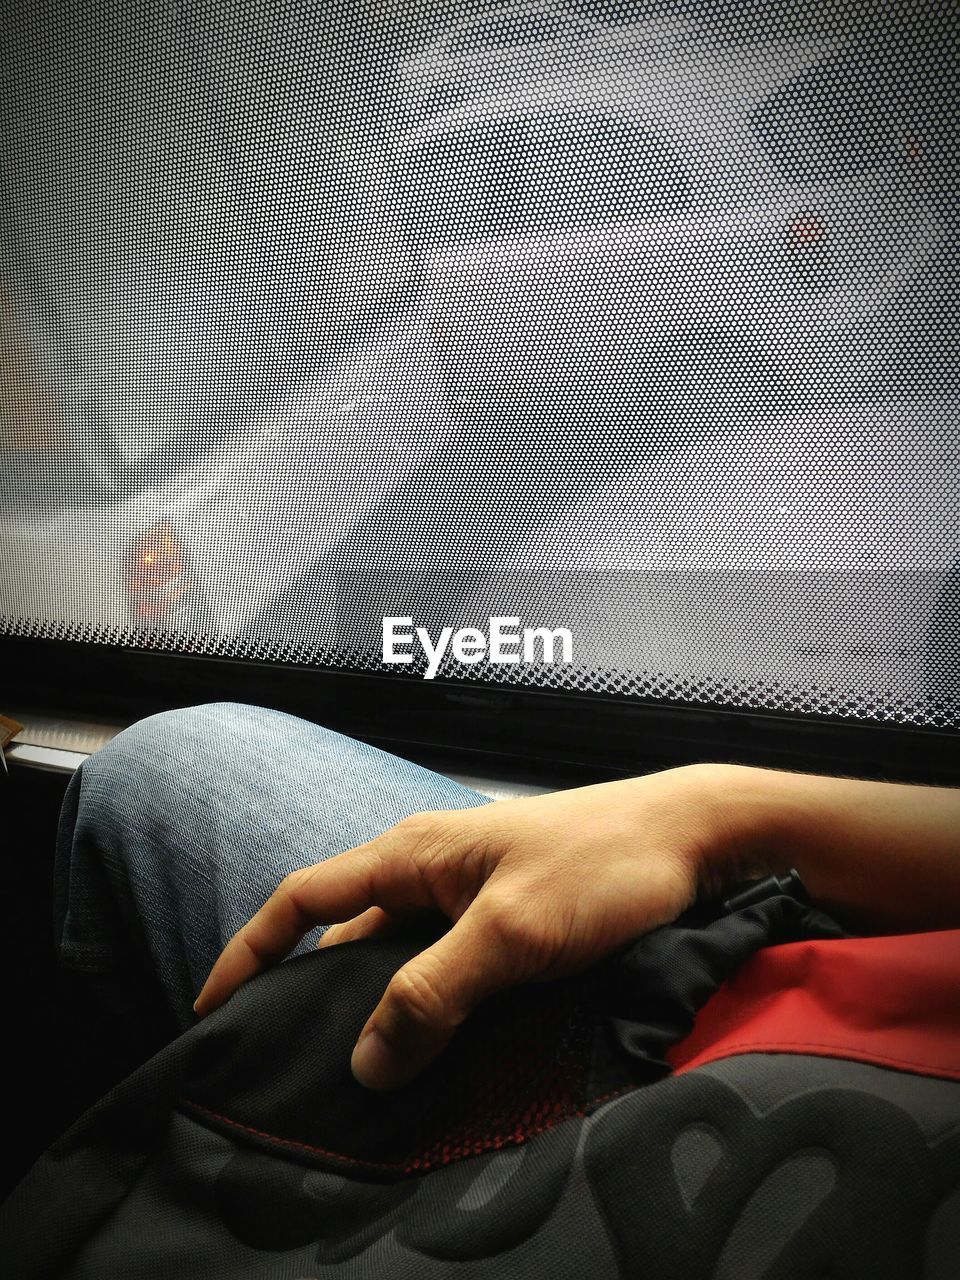 Midsection of man sitting in bus